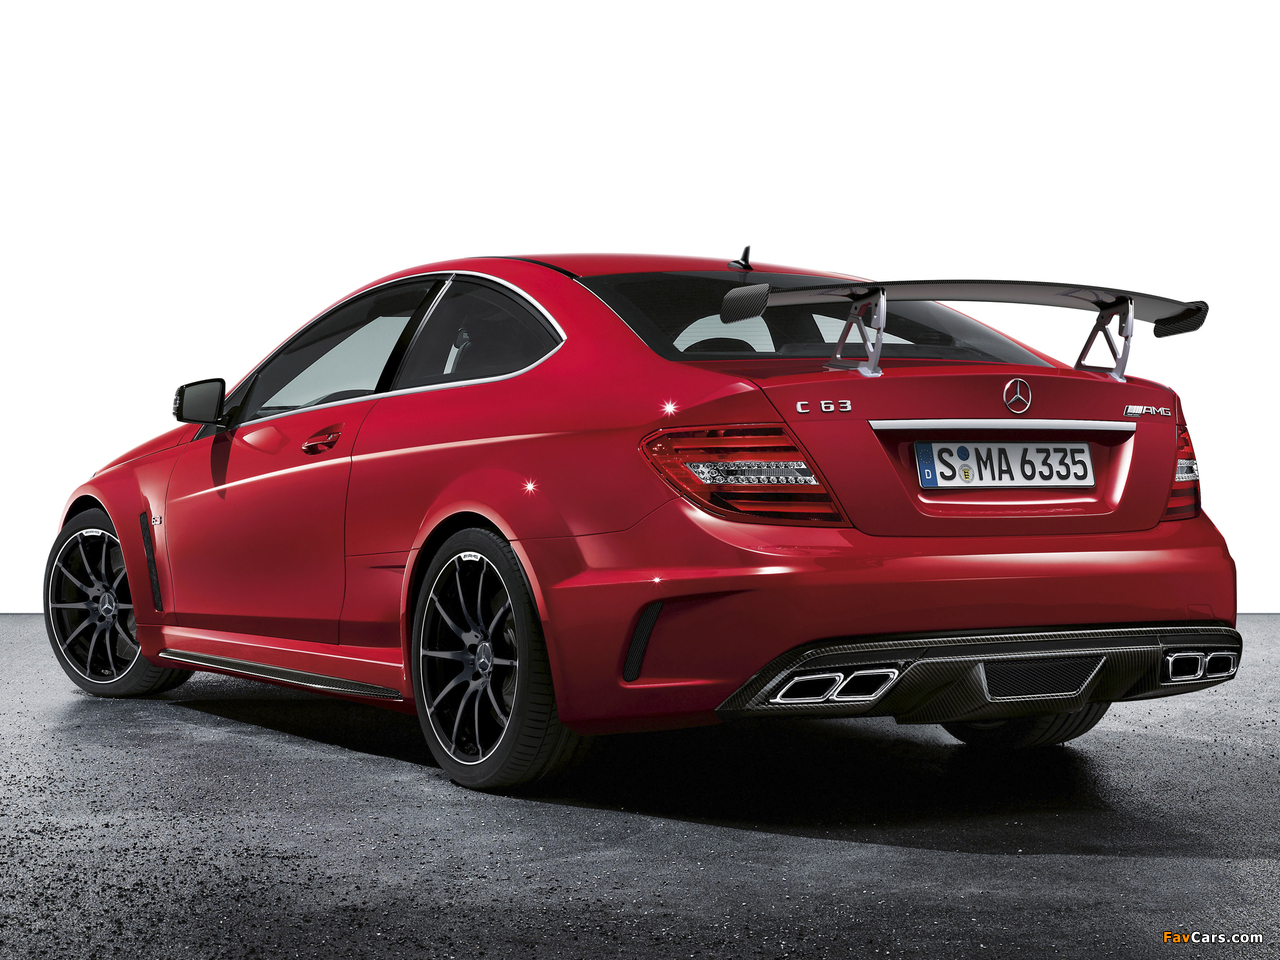 Mercedes-Benz C 63 AMG Black Series Coupe (C204) 2011 pictures (1280 x 960)